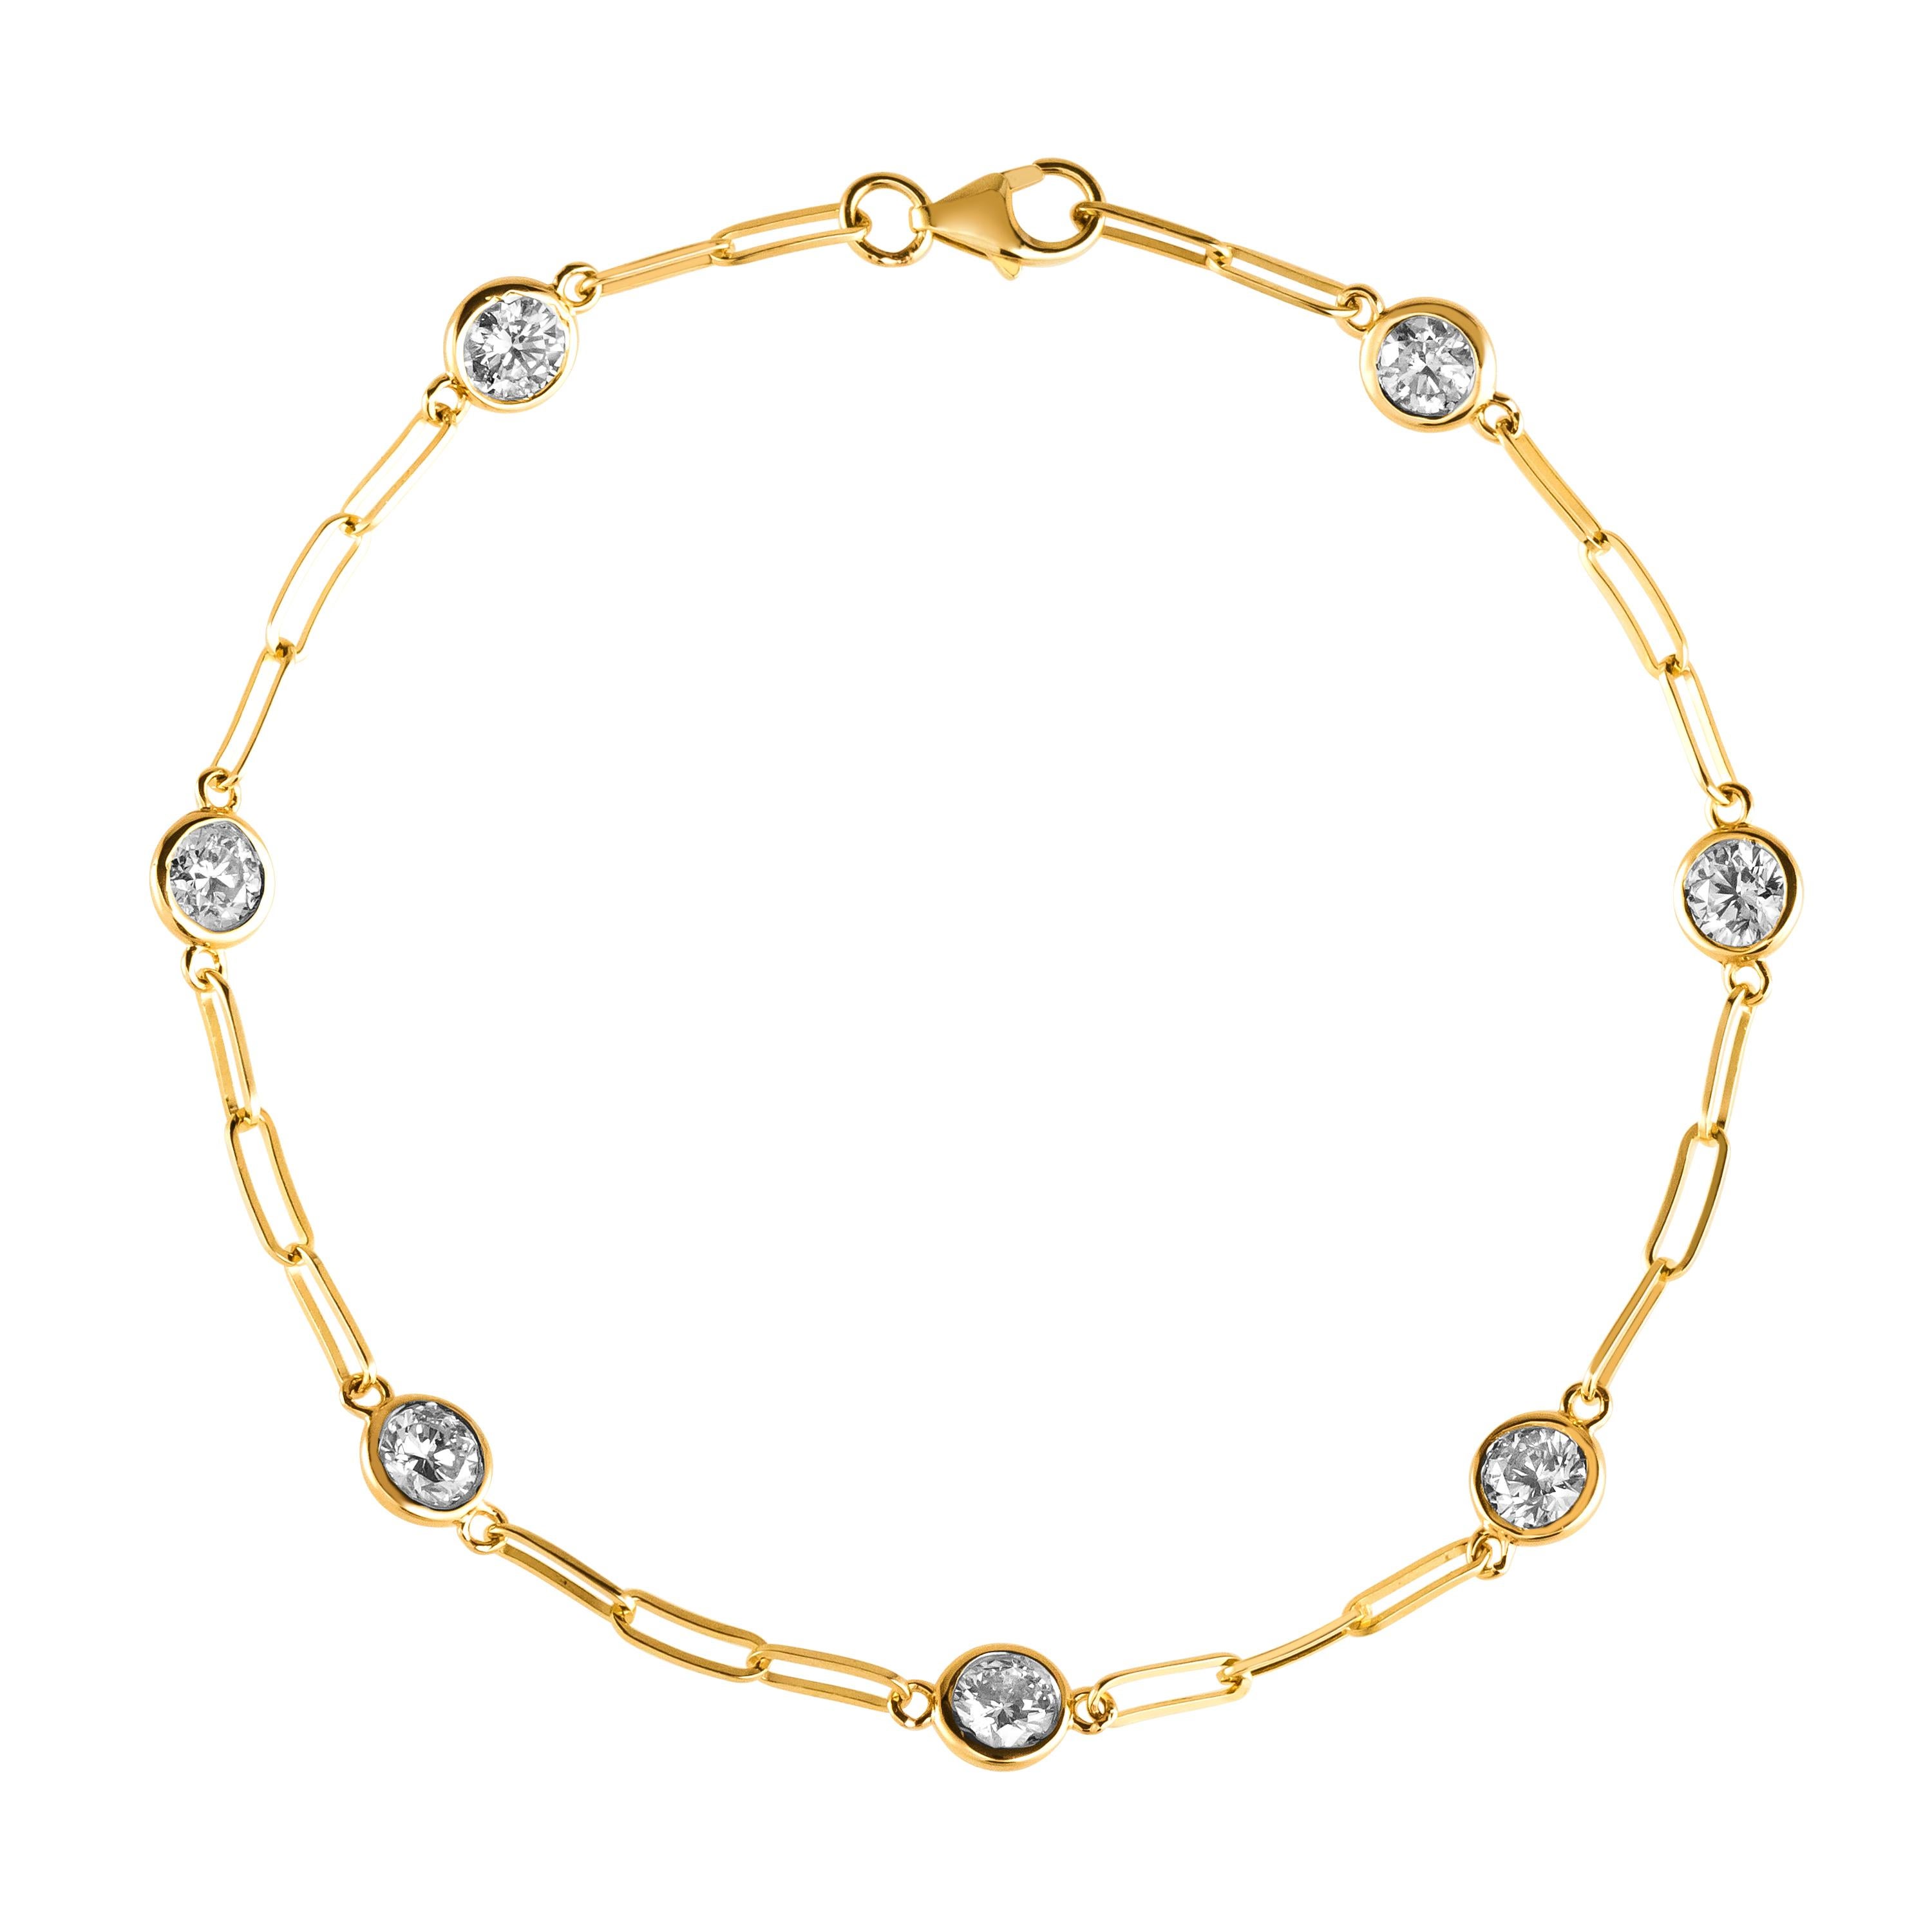 0.52 Carat Natural Diamond Paper Clip Bracelet G SI 14K Yellow Gold 7 inches

100% Natural Diamonds, Not Enhanced in any way
0.52CT
G-H 
SI  
14K Yellow Gold, Bezel set, 1.2 grams
7 inches in length, 1/8 inch in width
7 diamonds, each diamond is